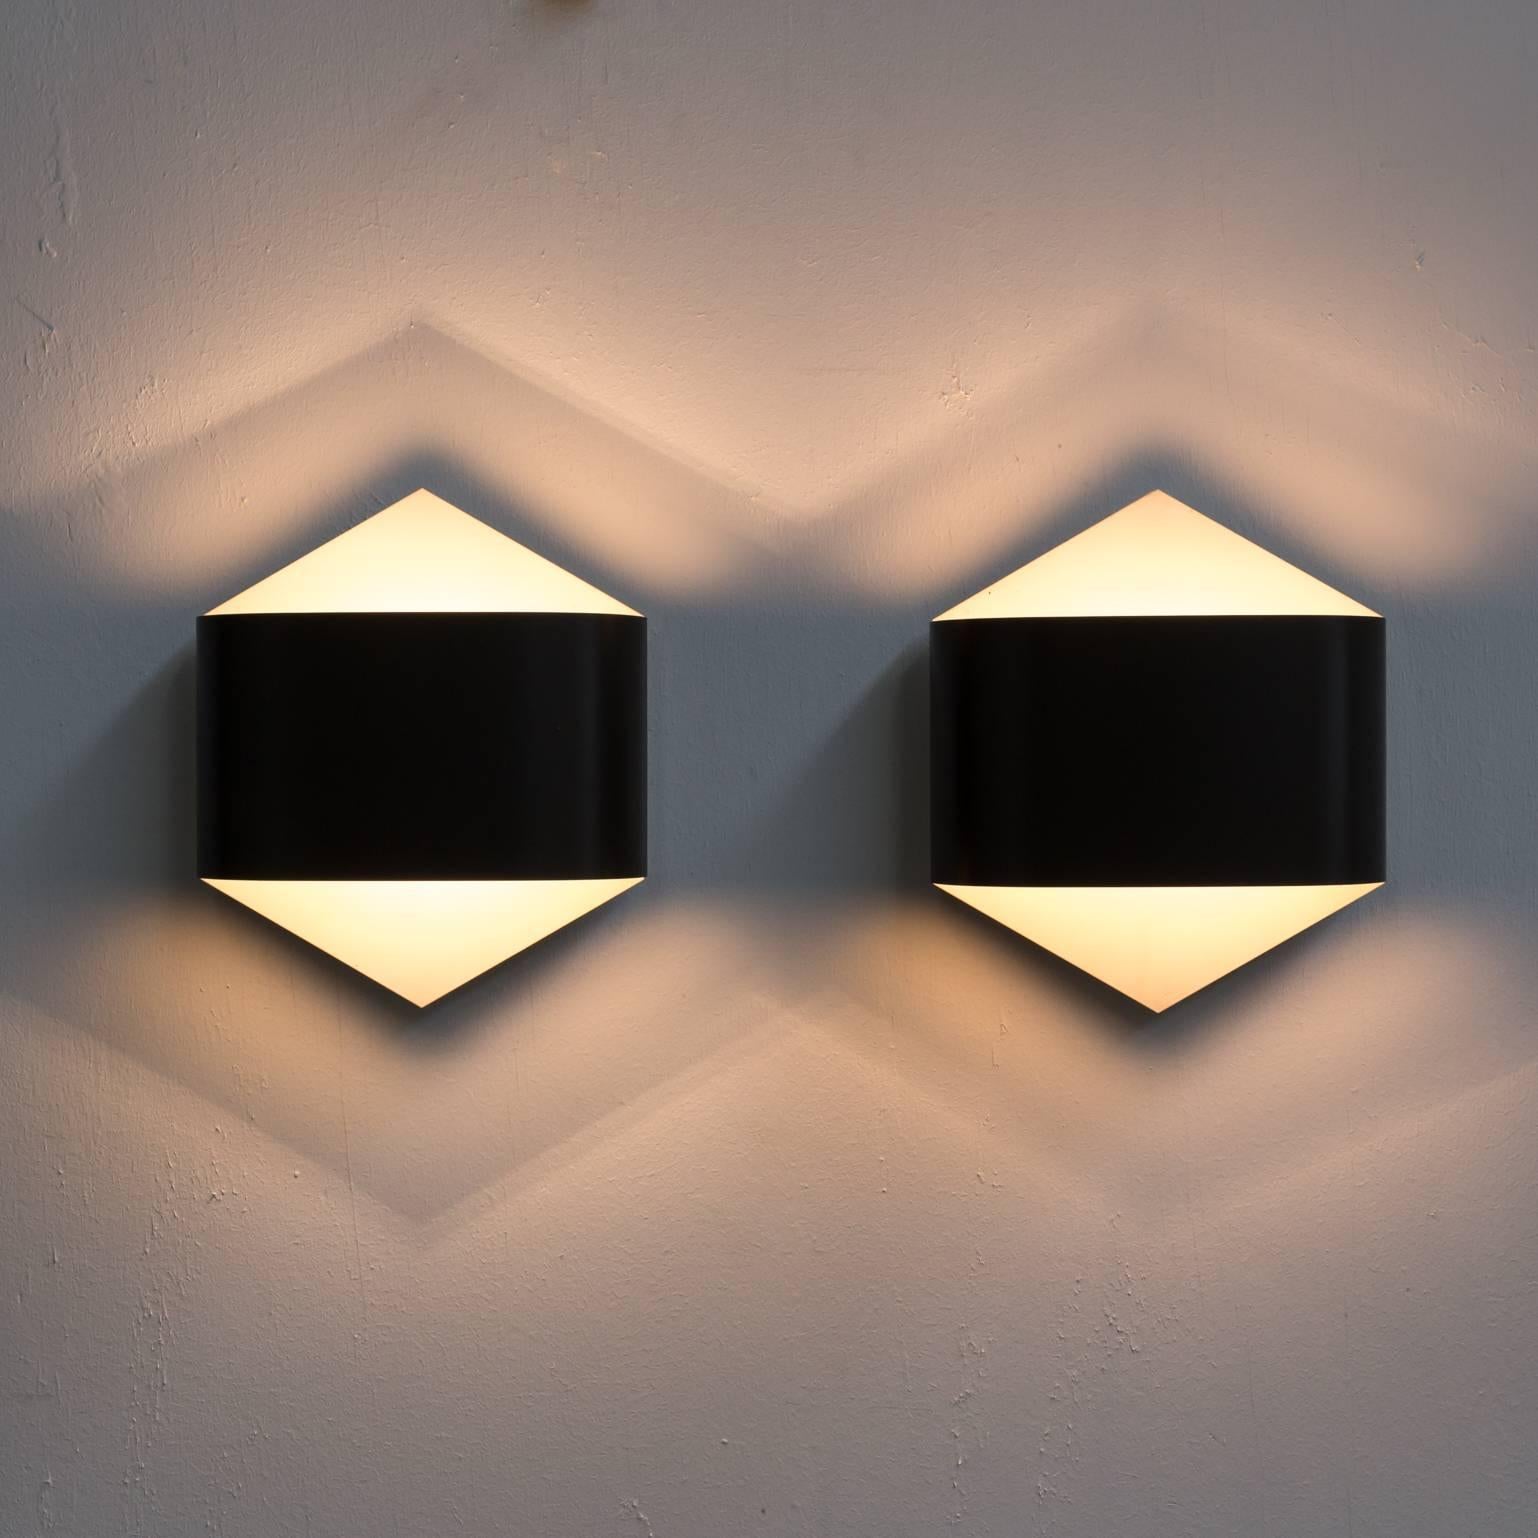 1960s Rolf Krüger & Dieter Witte wall sconces by Staff Germany, set of two Good condition consistent with age and use.